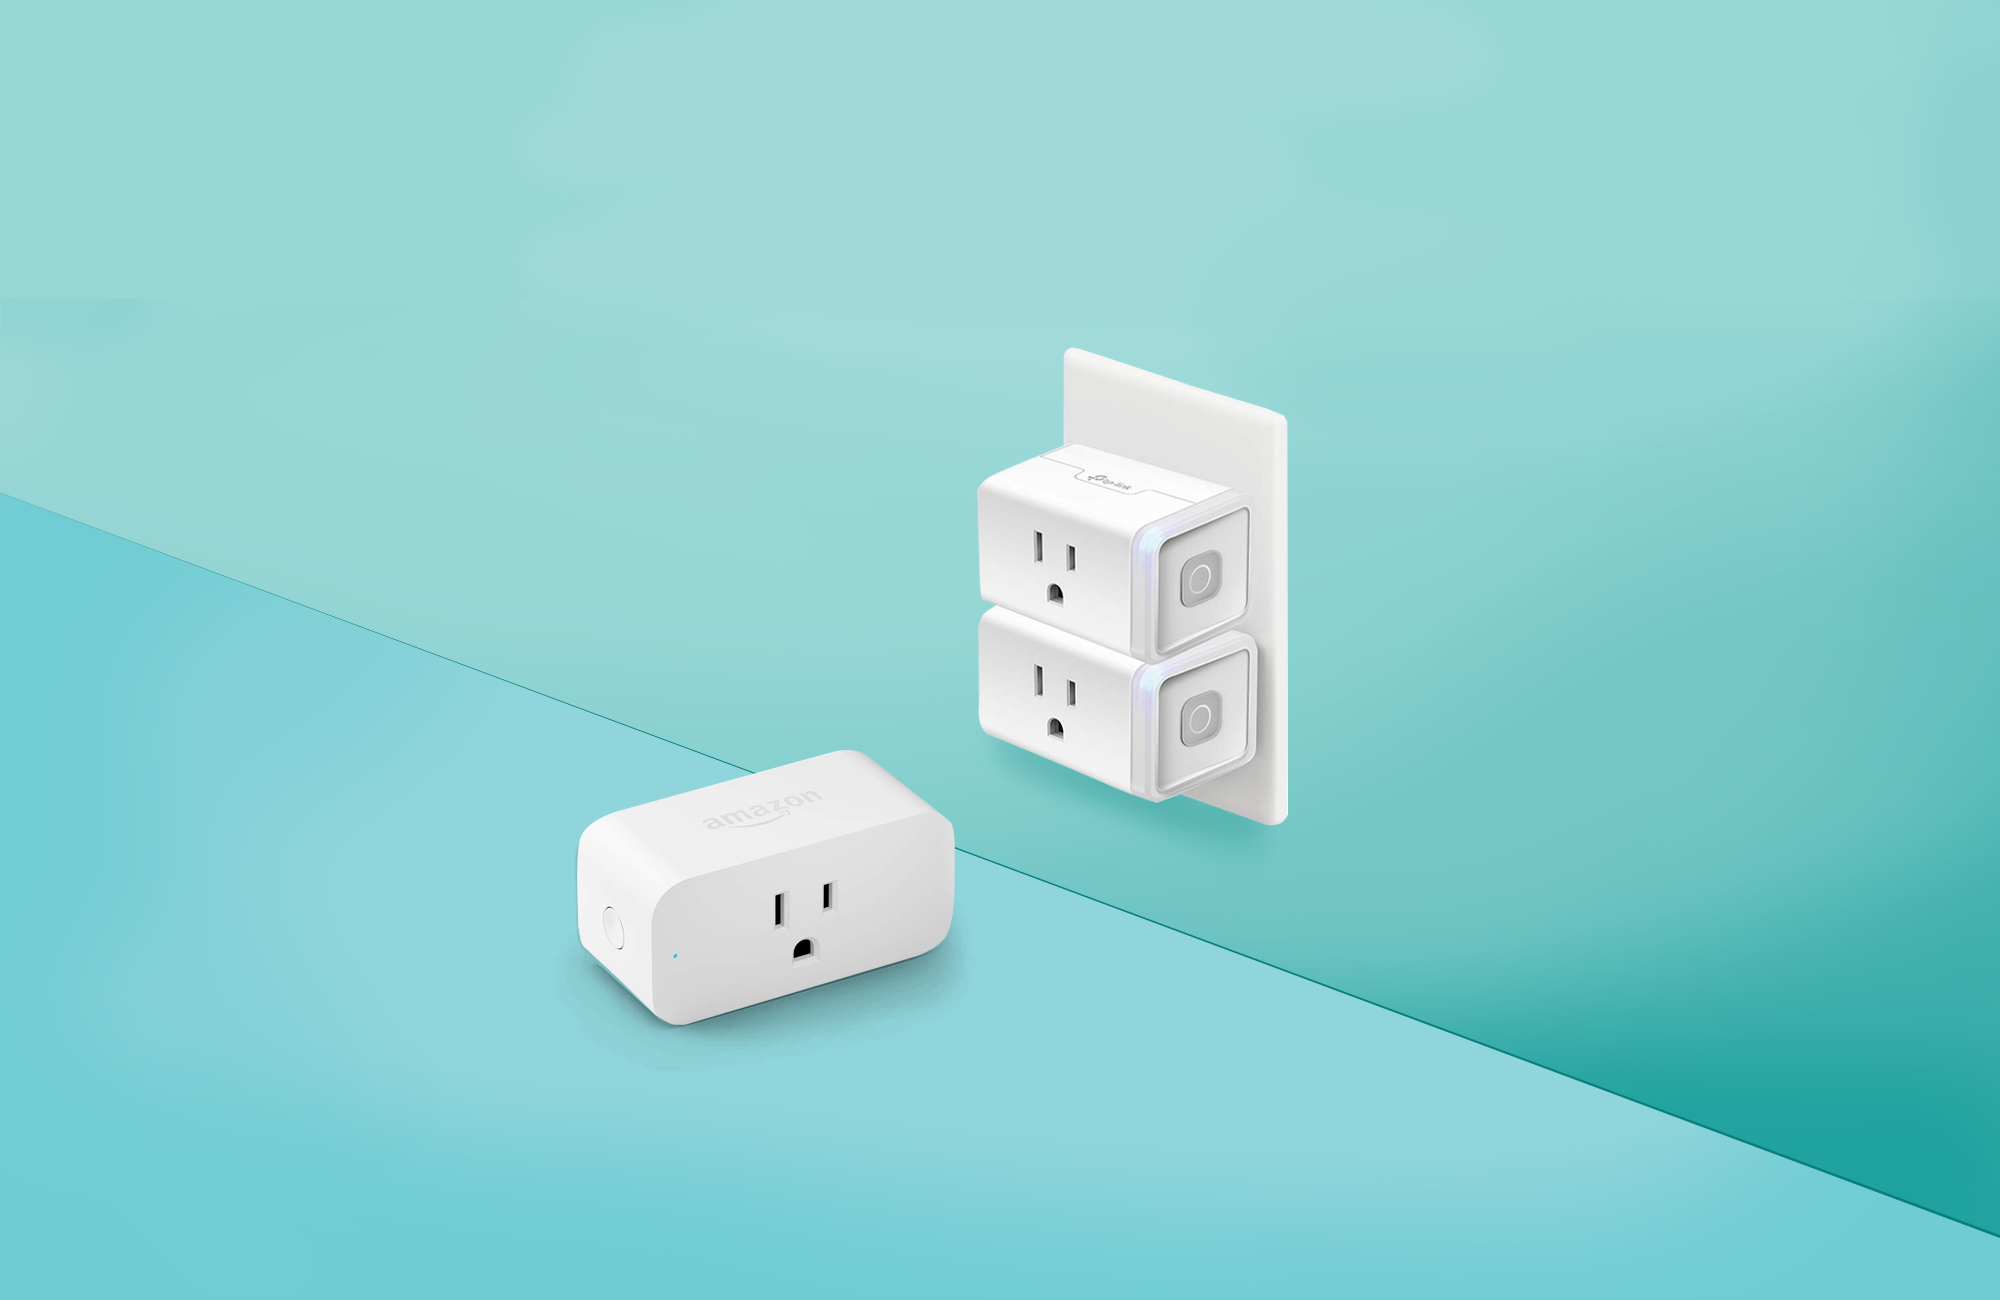 Smart Plug,DOGAIN Zigbee Smart Plugs Outlet Works with ST and Echo Plus Hub Voice Control Compatible with Alexa and the Google Assistant 2 Pack Hub Required 